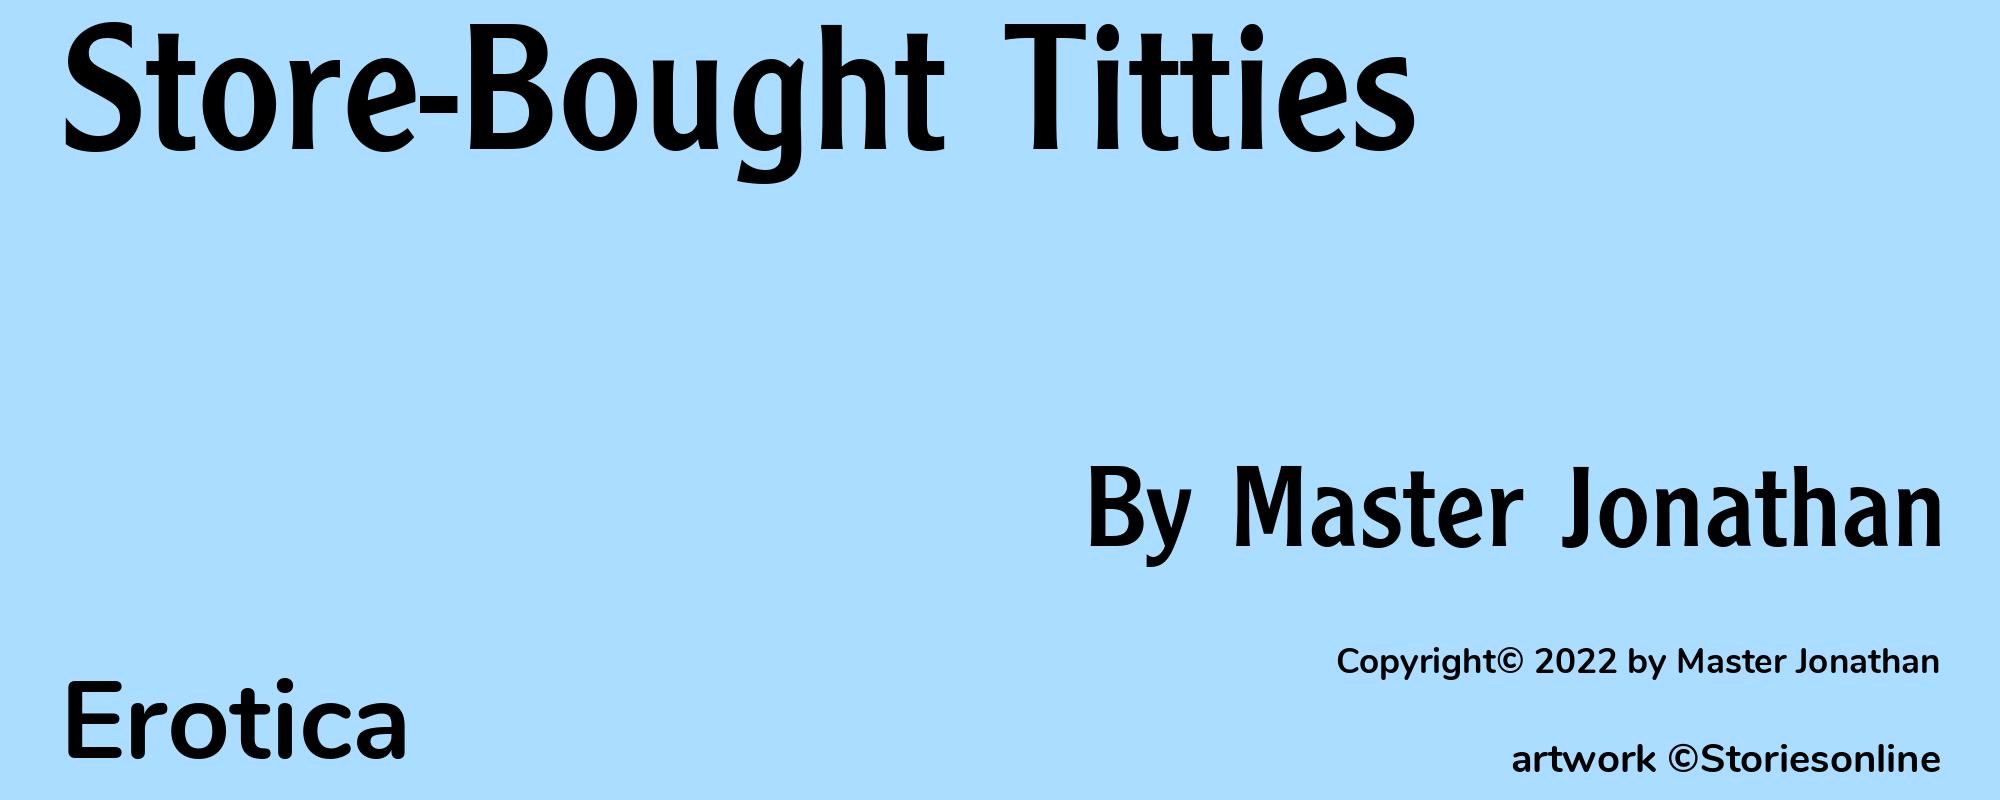 Store-Bought Titties - Cover